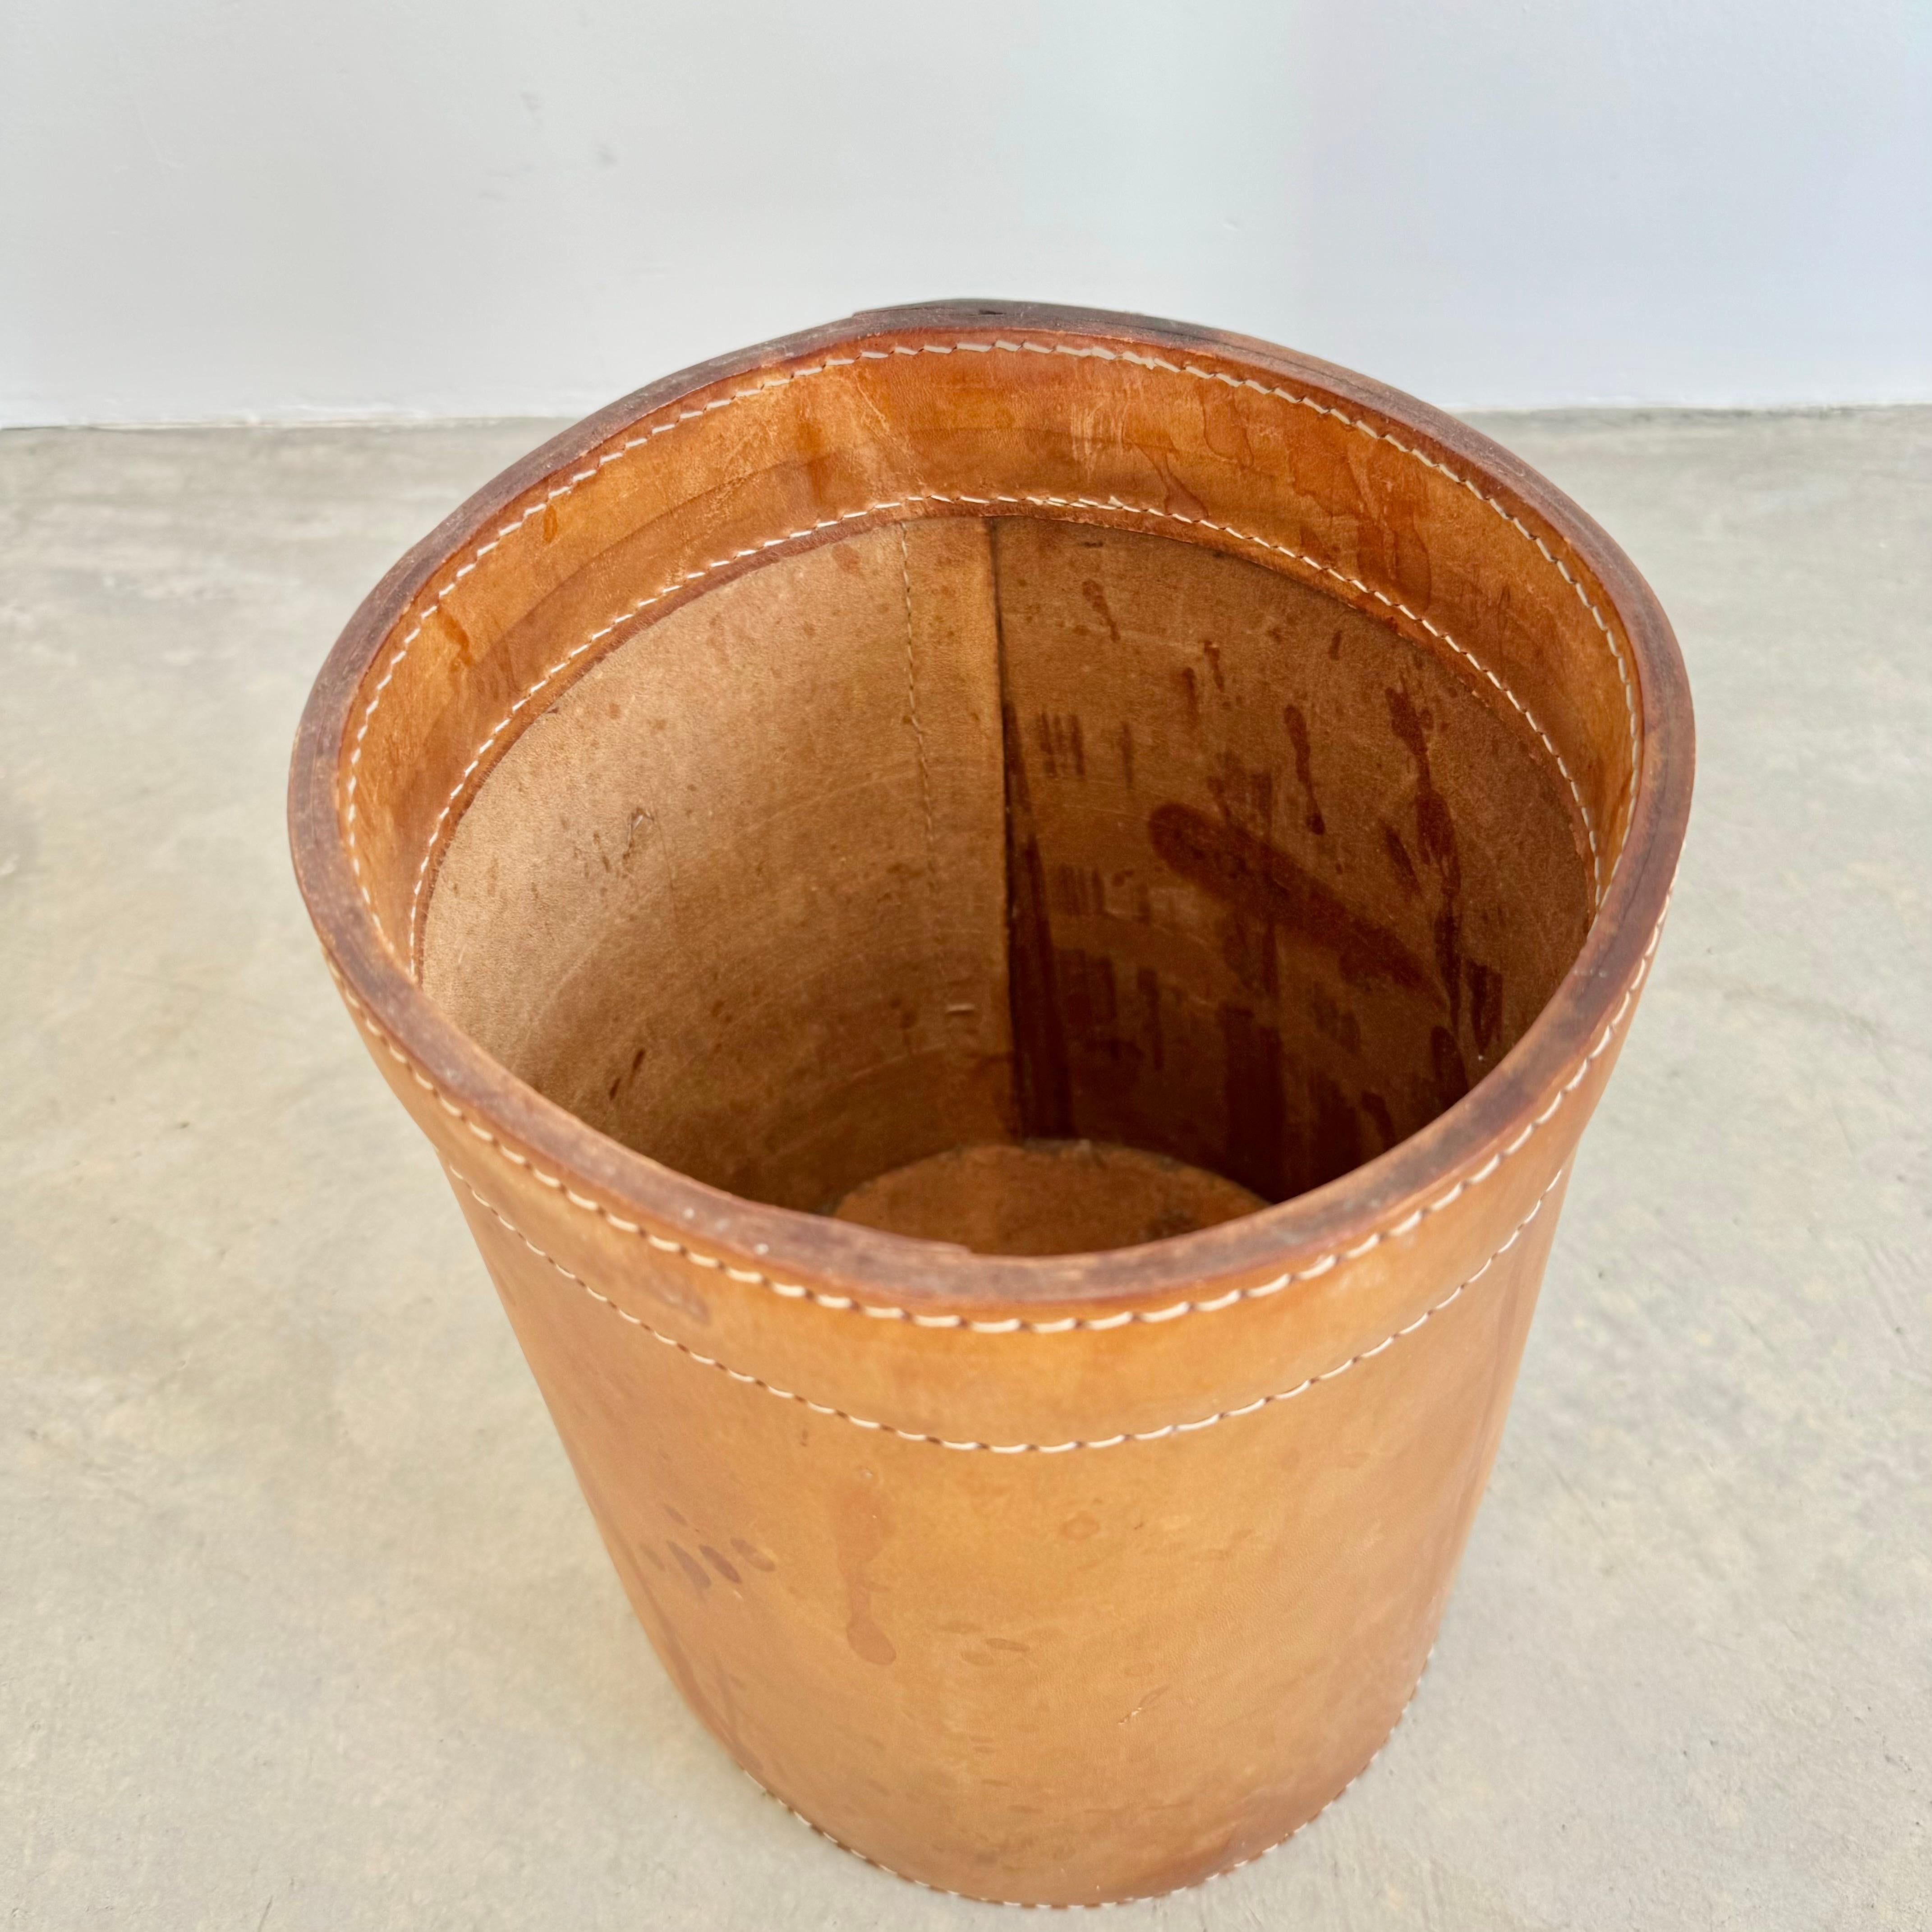 Jacques Adnet Style Saddle Leather Waste Basket, 1950s France For Sale 1